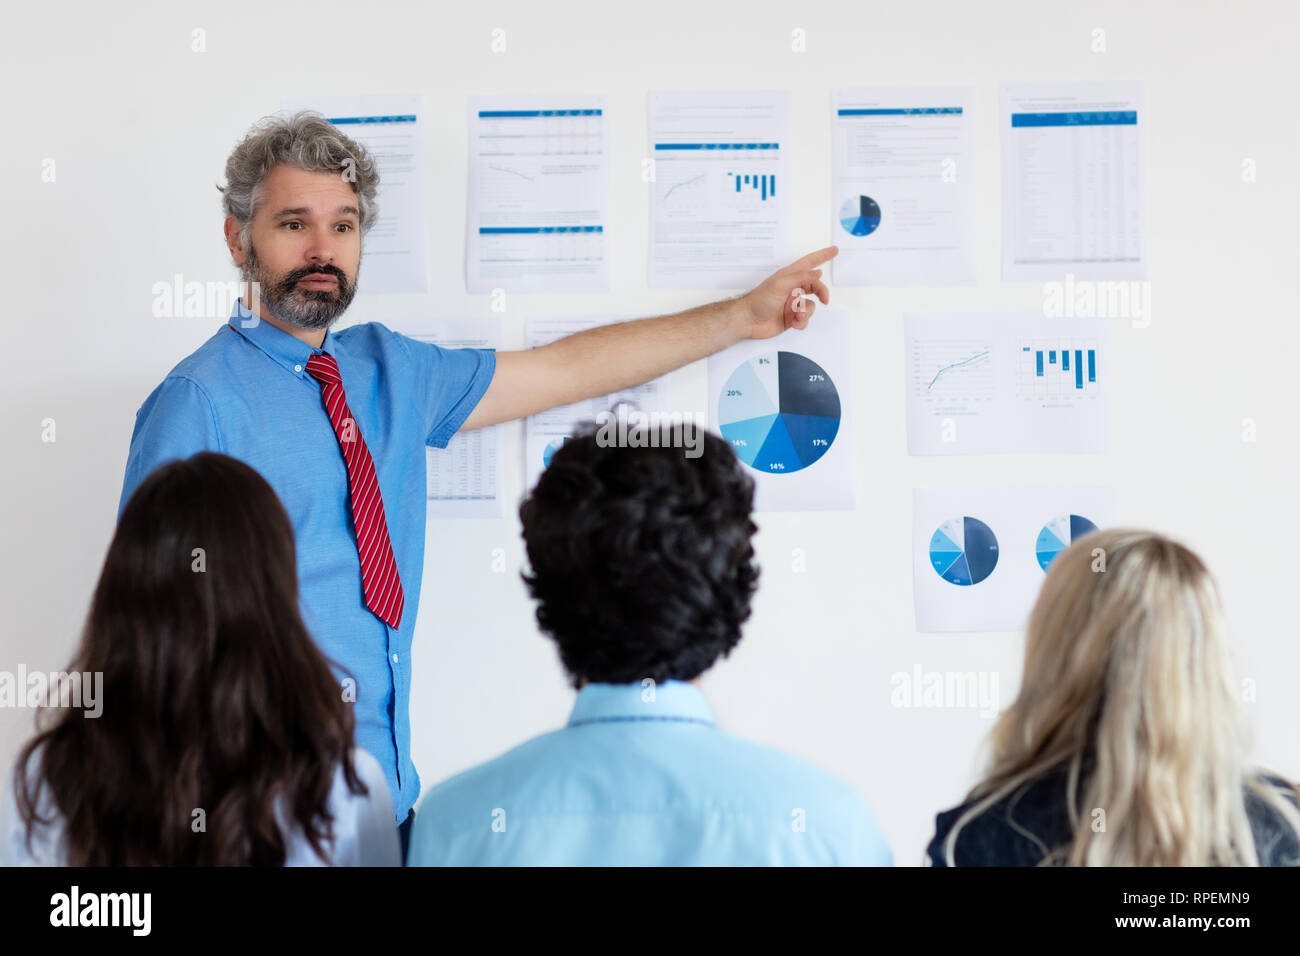 Elderly businessmann with grey hair giving presentation to colleagues at office of modern company Stock Photo